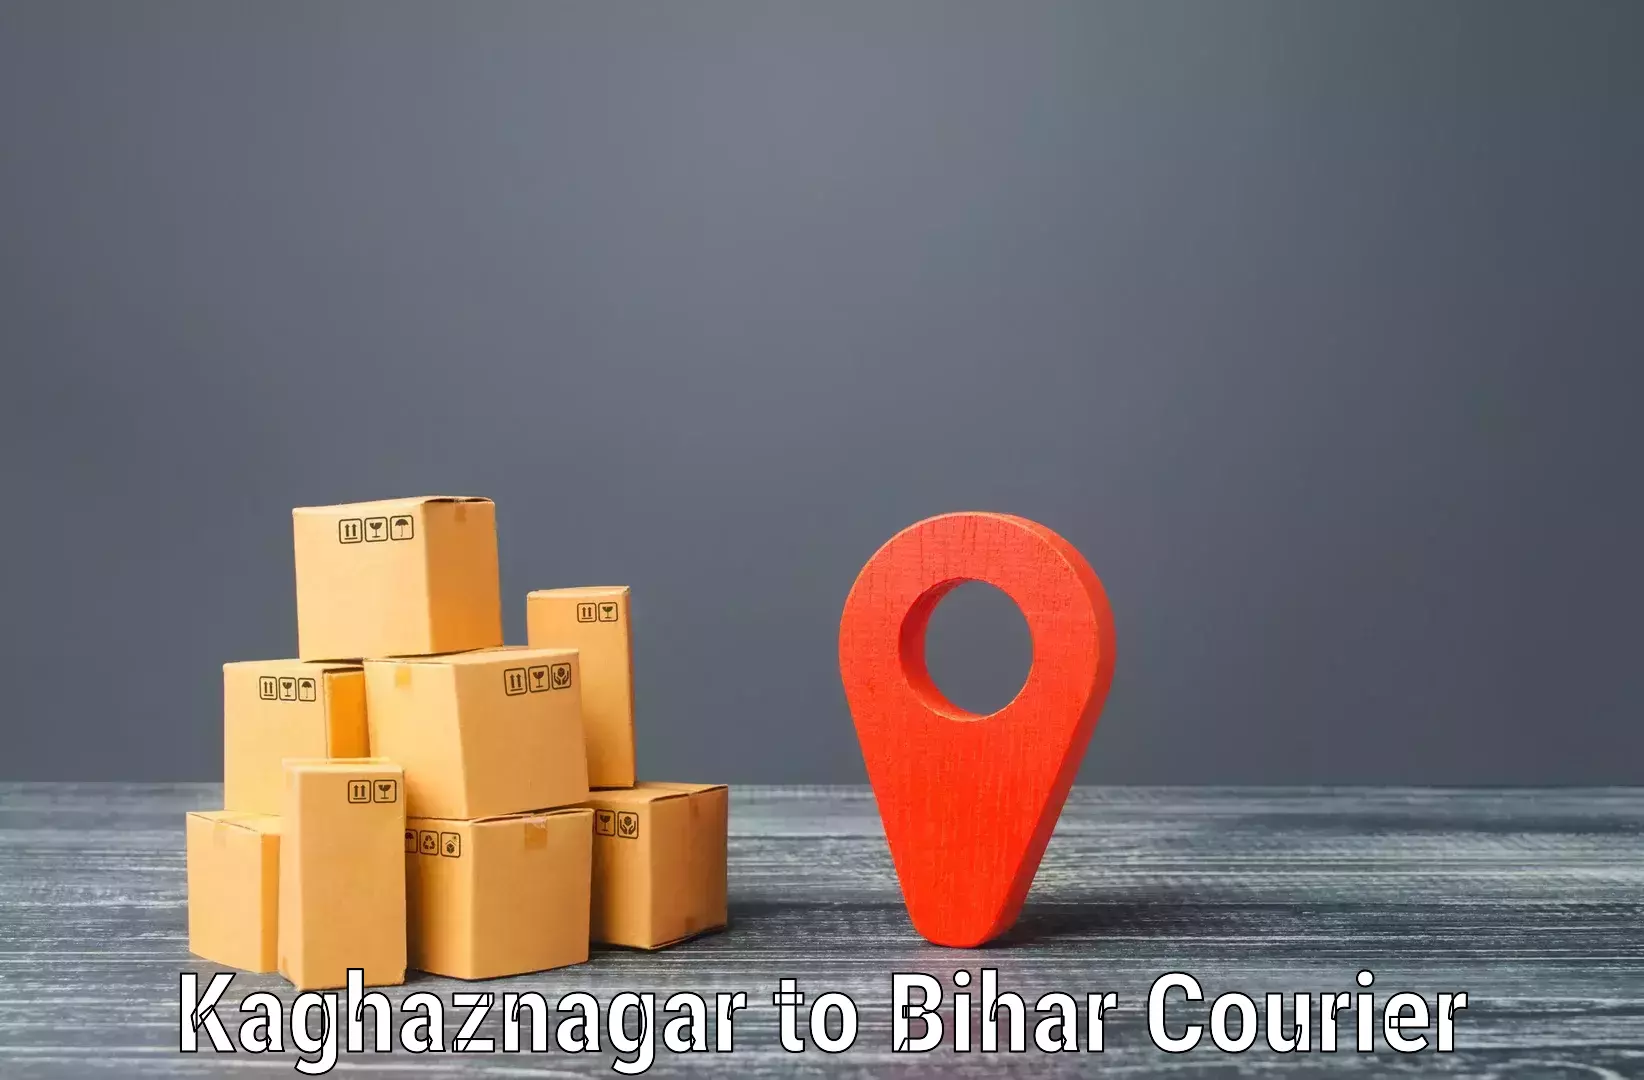 Personal courier services Kaghaznagar to Rajpur